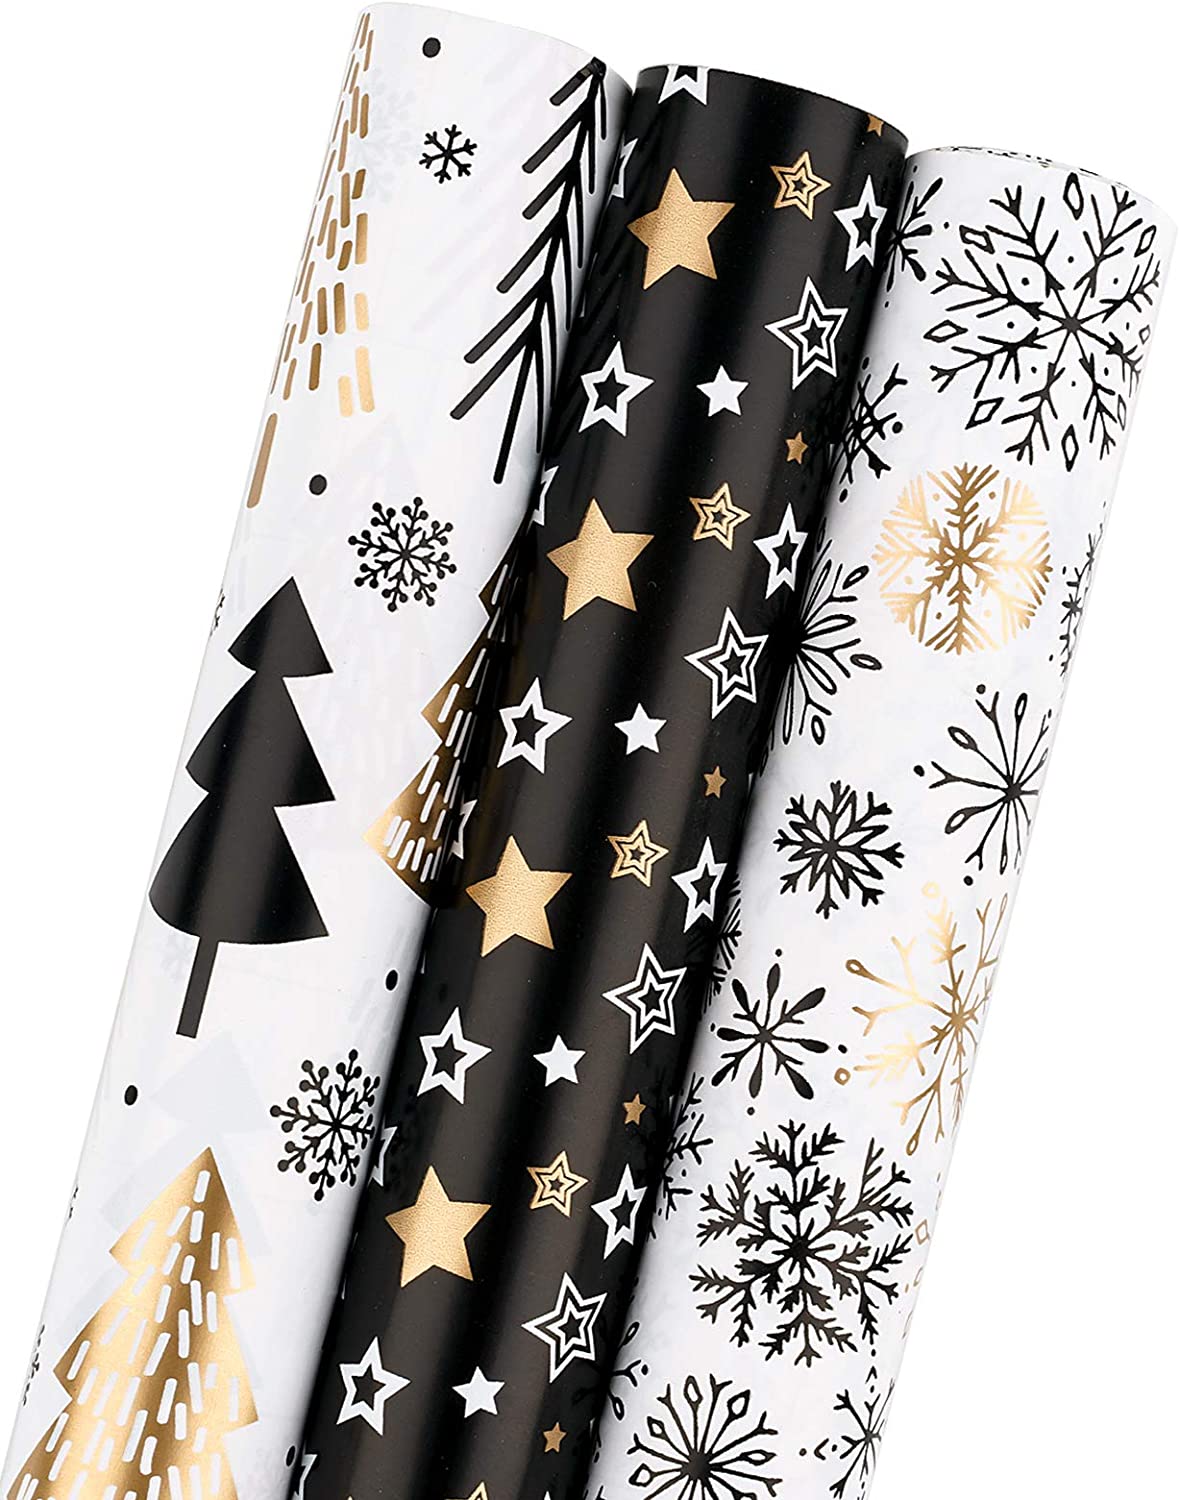 Black Gold Christmas Wrapping Paper Mini Roll - 17 inch X 120 inch